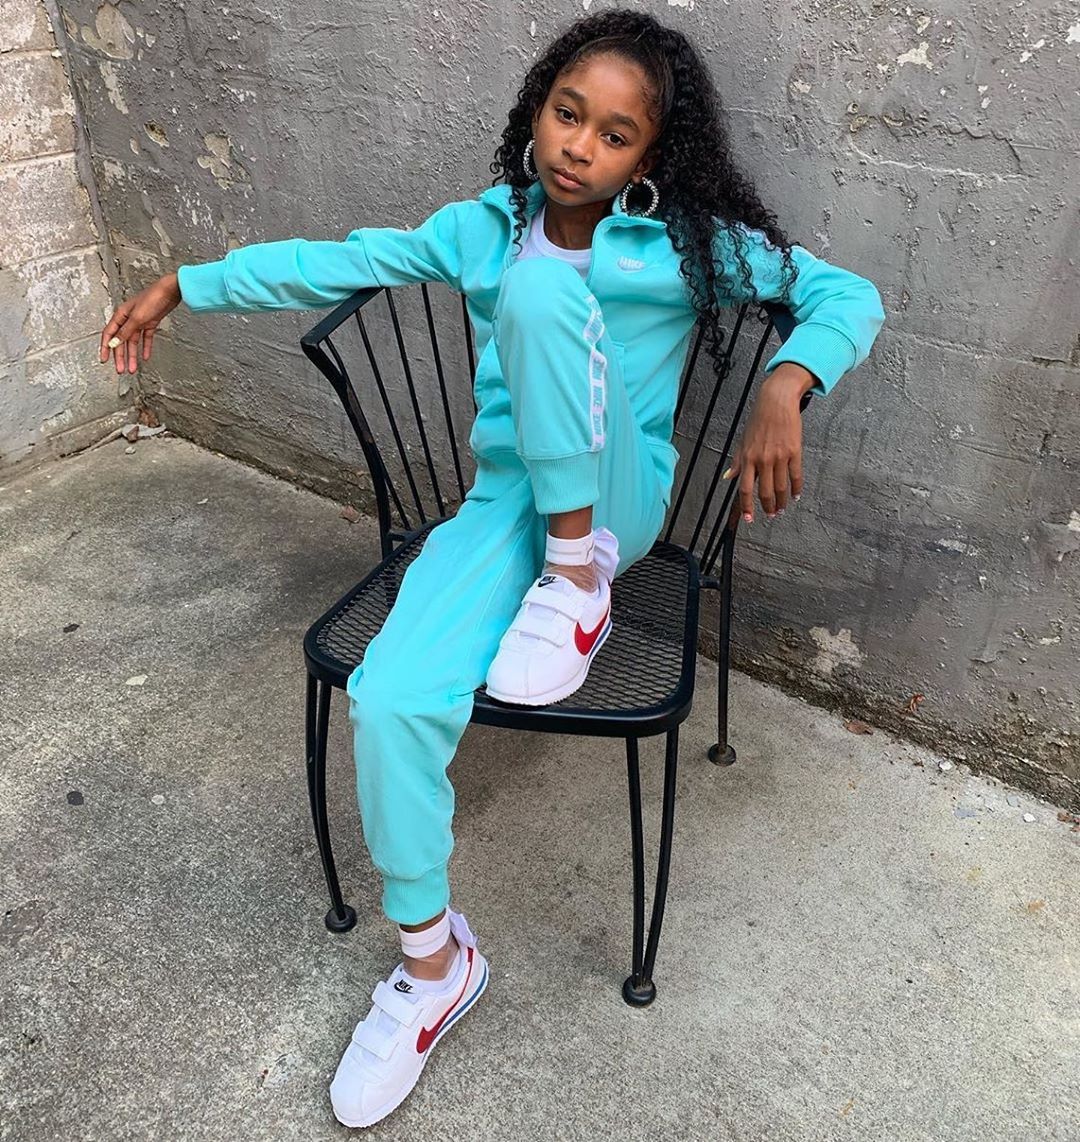 Instagram On Instagram: “Thirteen Year Old Rapper And Entertainer Alaya High, Aka That Girl Lay Lay. Kids Outfits Girls, Tween Outfits, Teenage Fashion Outfits